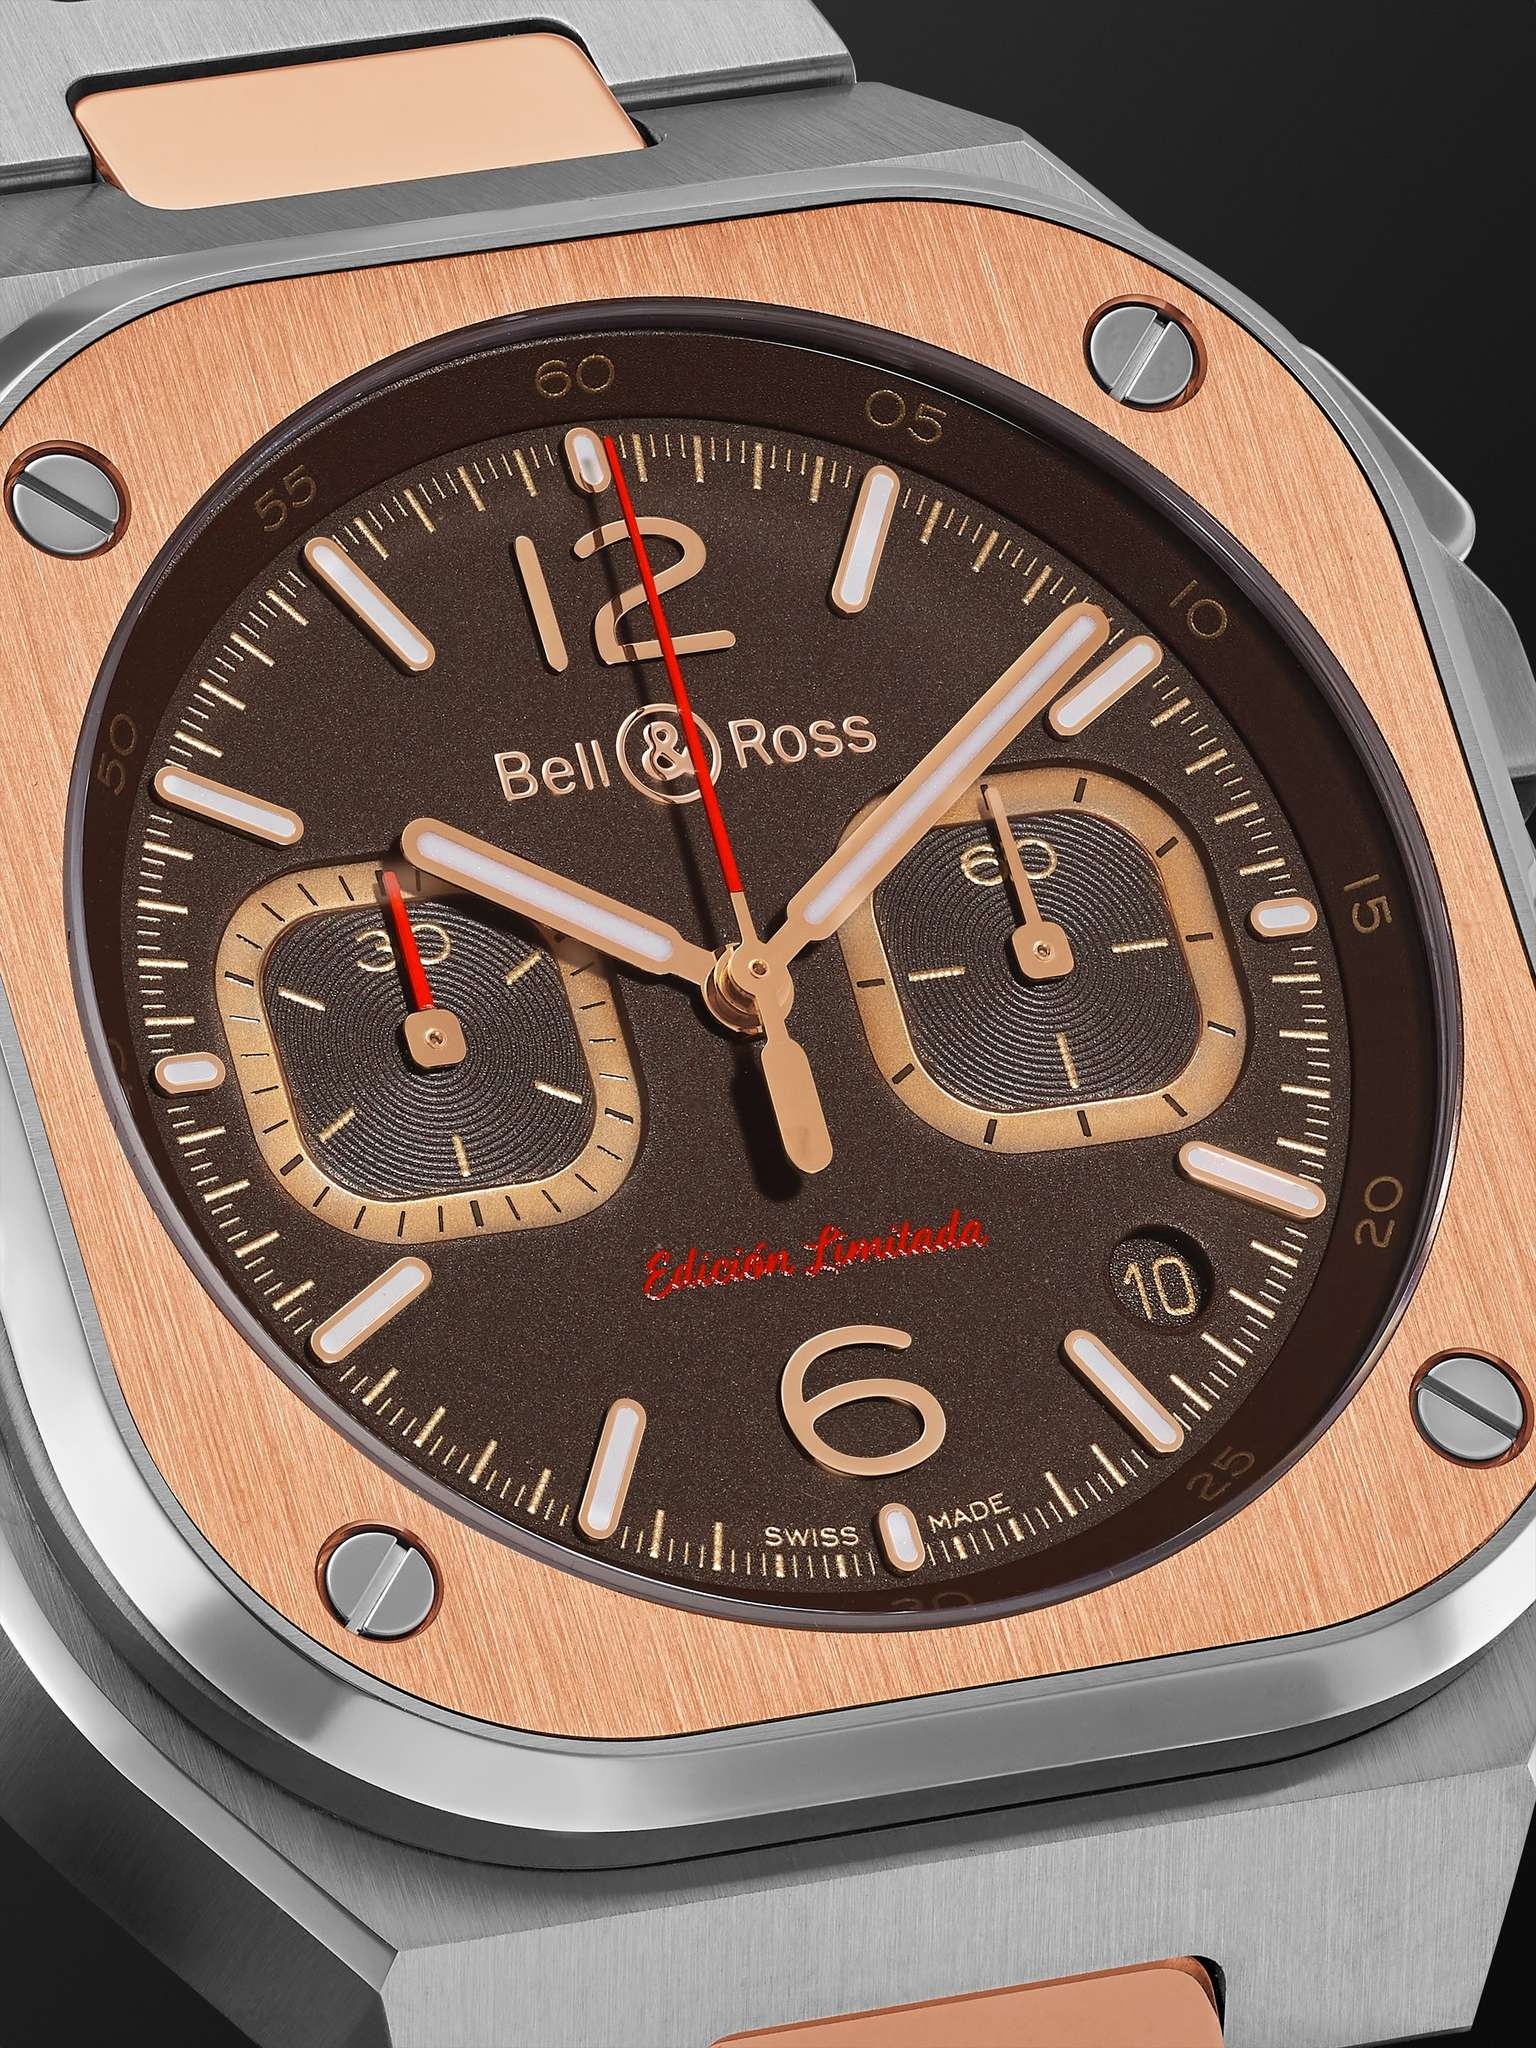 BR 05 Limited Edition Automatic Chronograph 42mm Stainless Steel and Rose Gold Watch, Ref. No. BR05C - 11